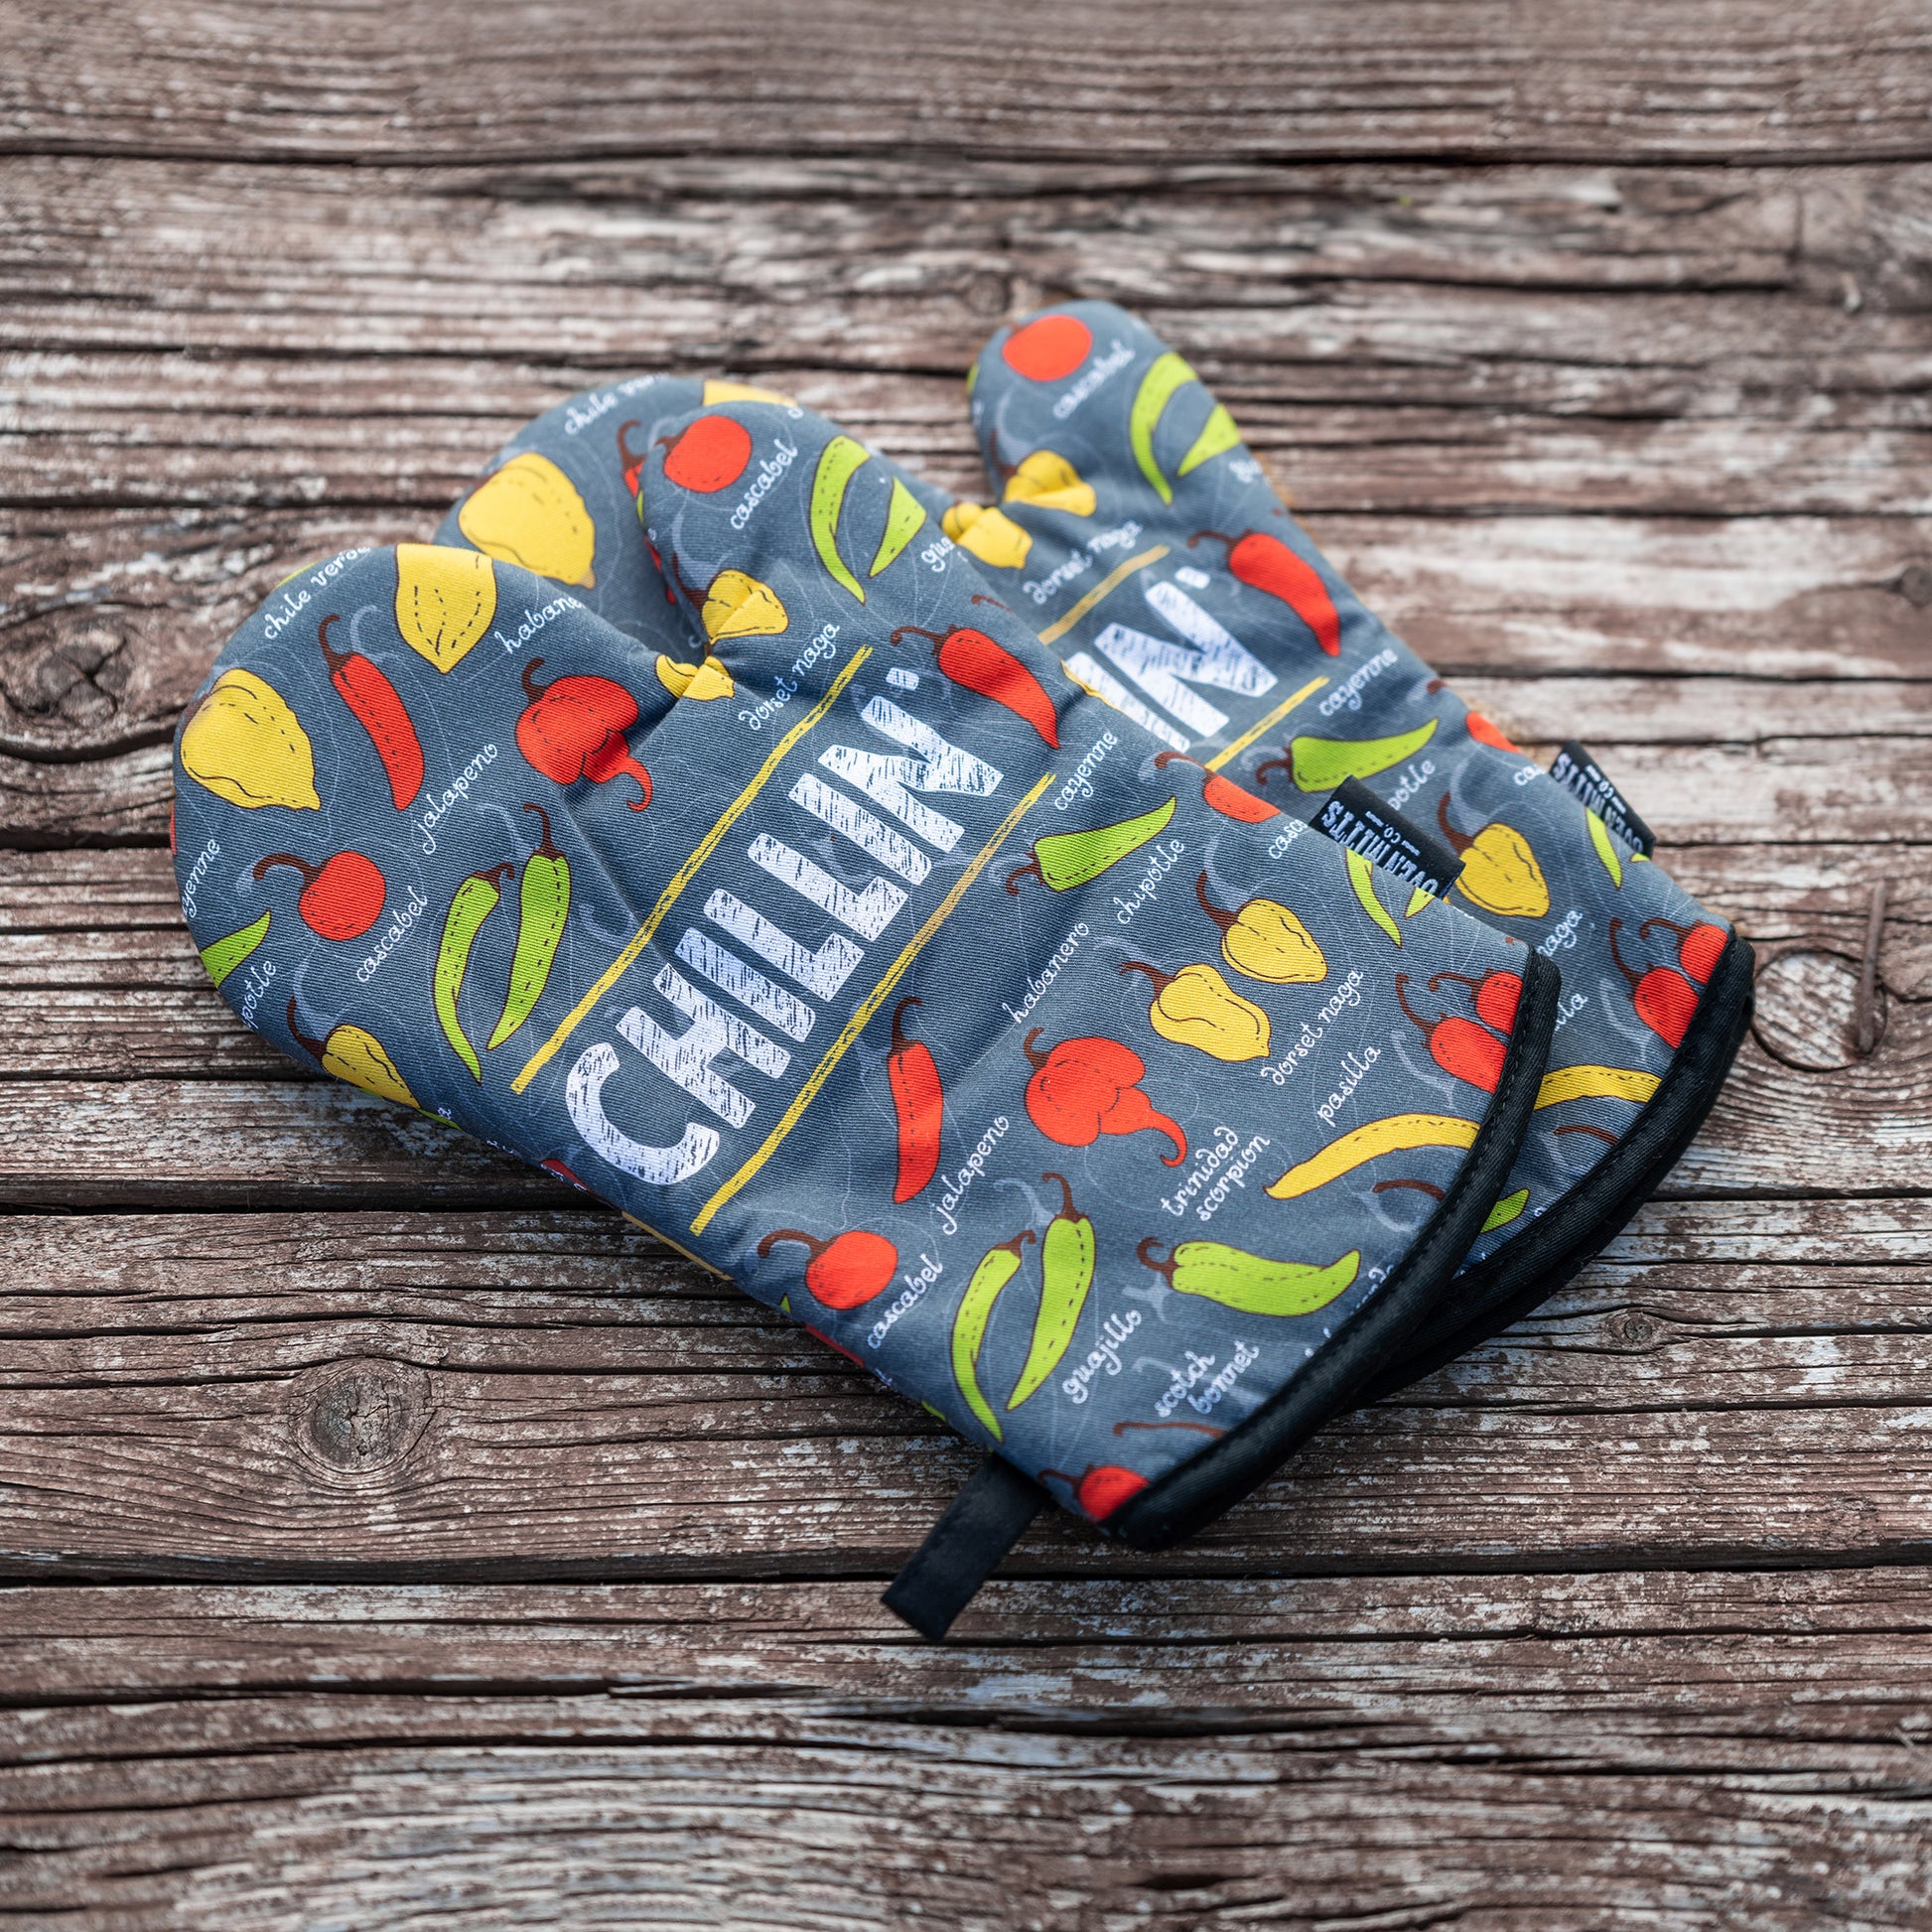 Chillin' Chillies Oven Mitts And Potholder Set best quality, funny oven mitt